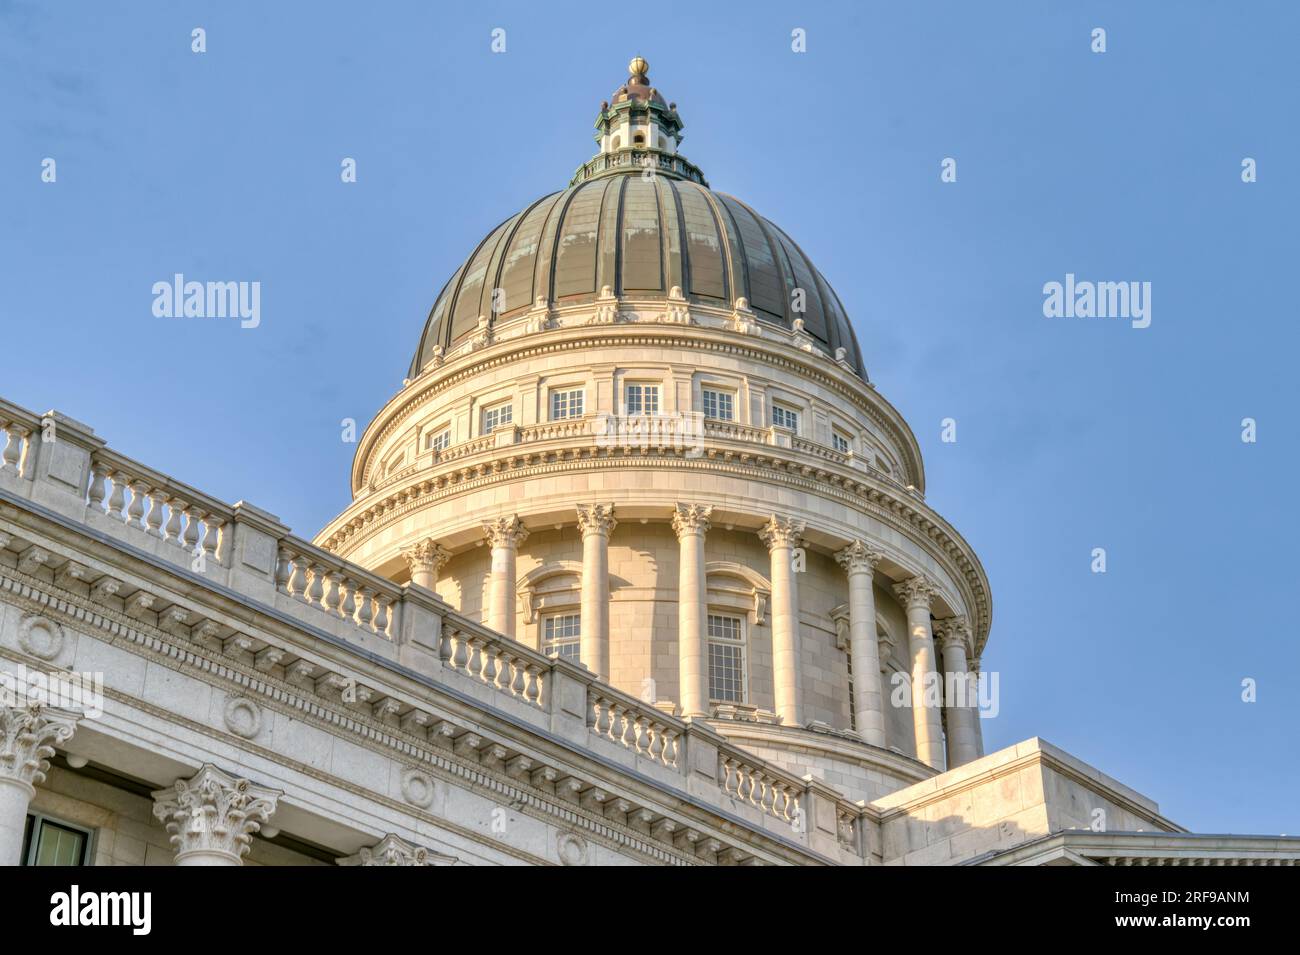 Dome of the Utah State Capitol Building on Capitol Hill in Salt Lake City, Utah Stock Photo